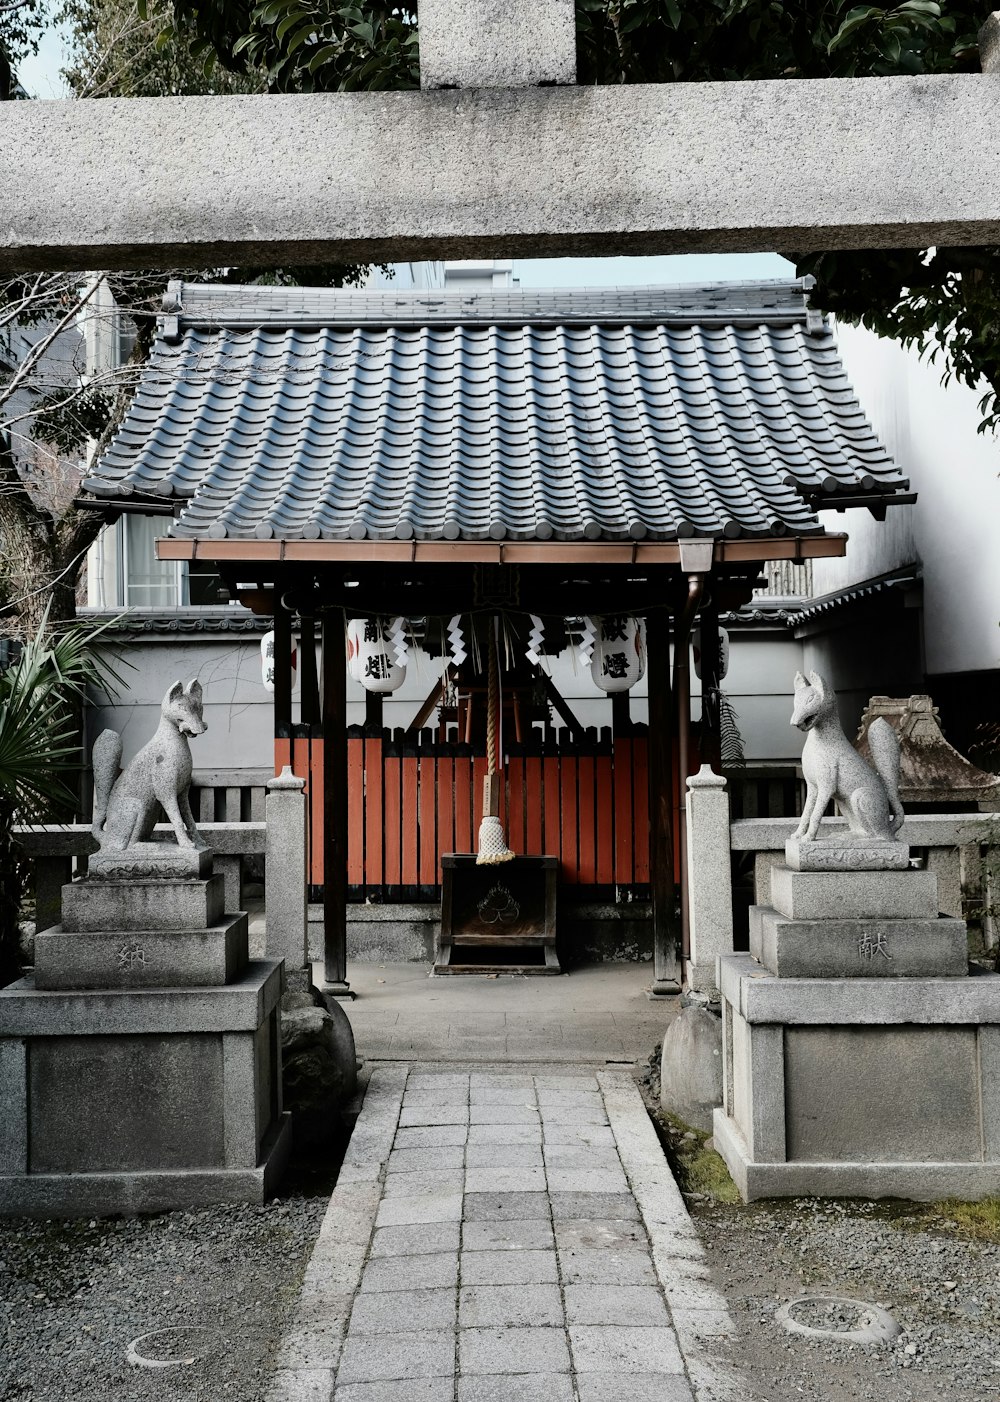 a small shrine with statues of dogs on either side of it